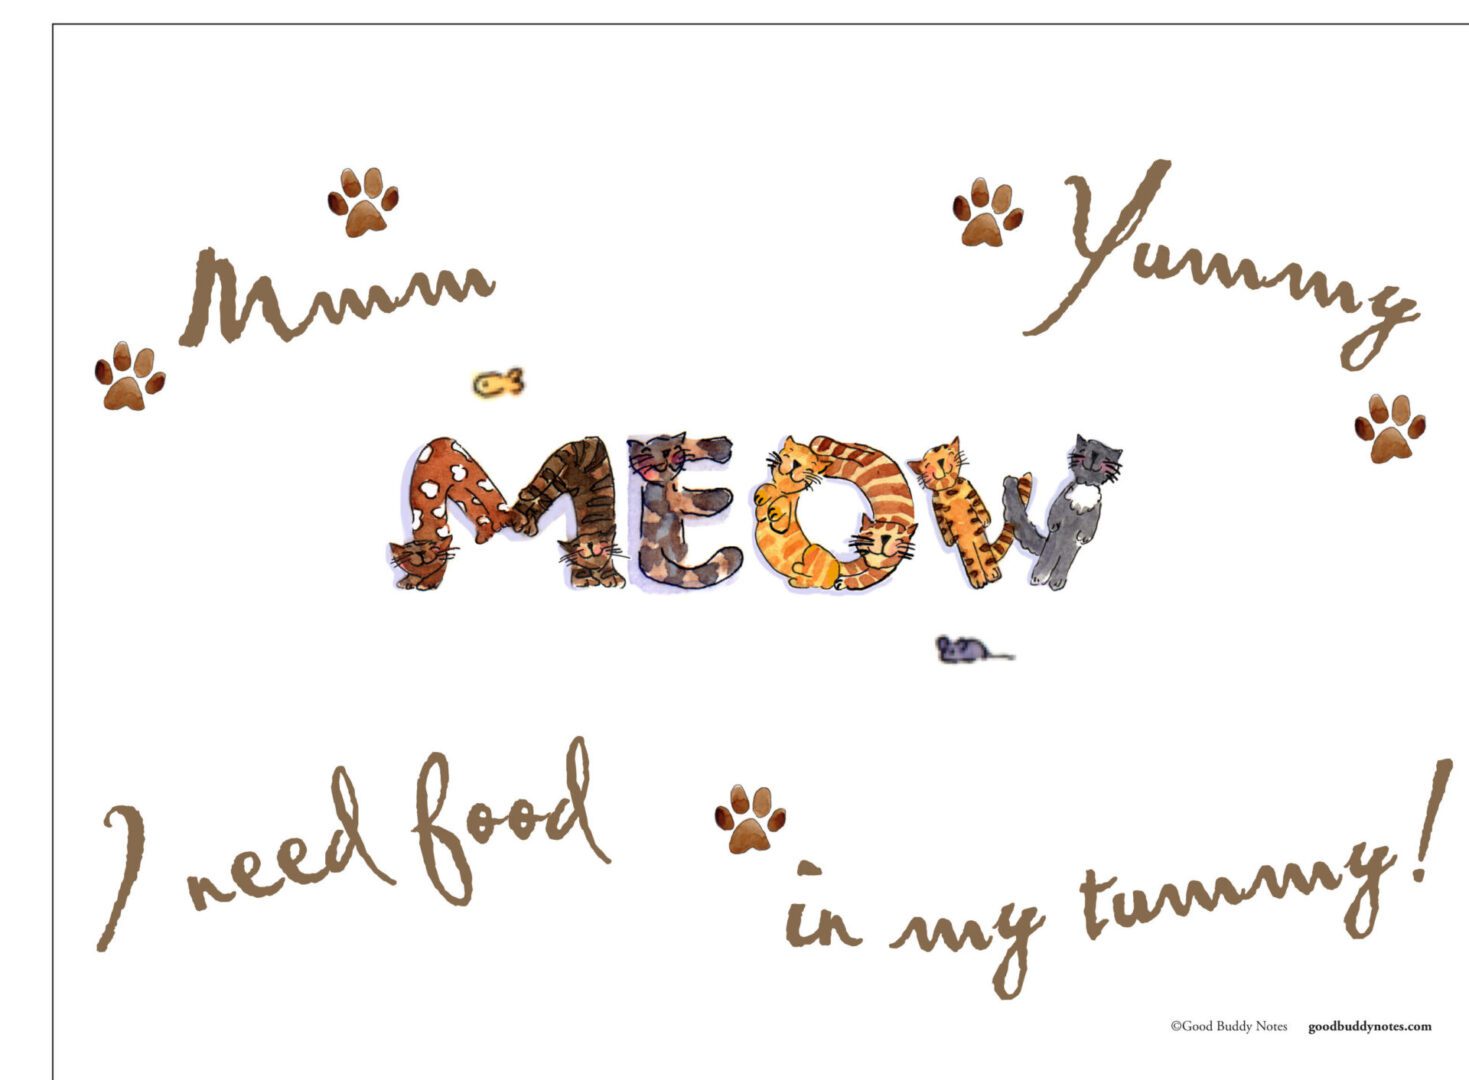 MEOW Cat Placemat